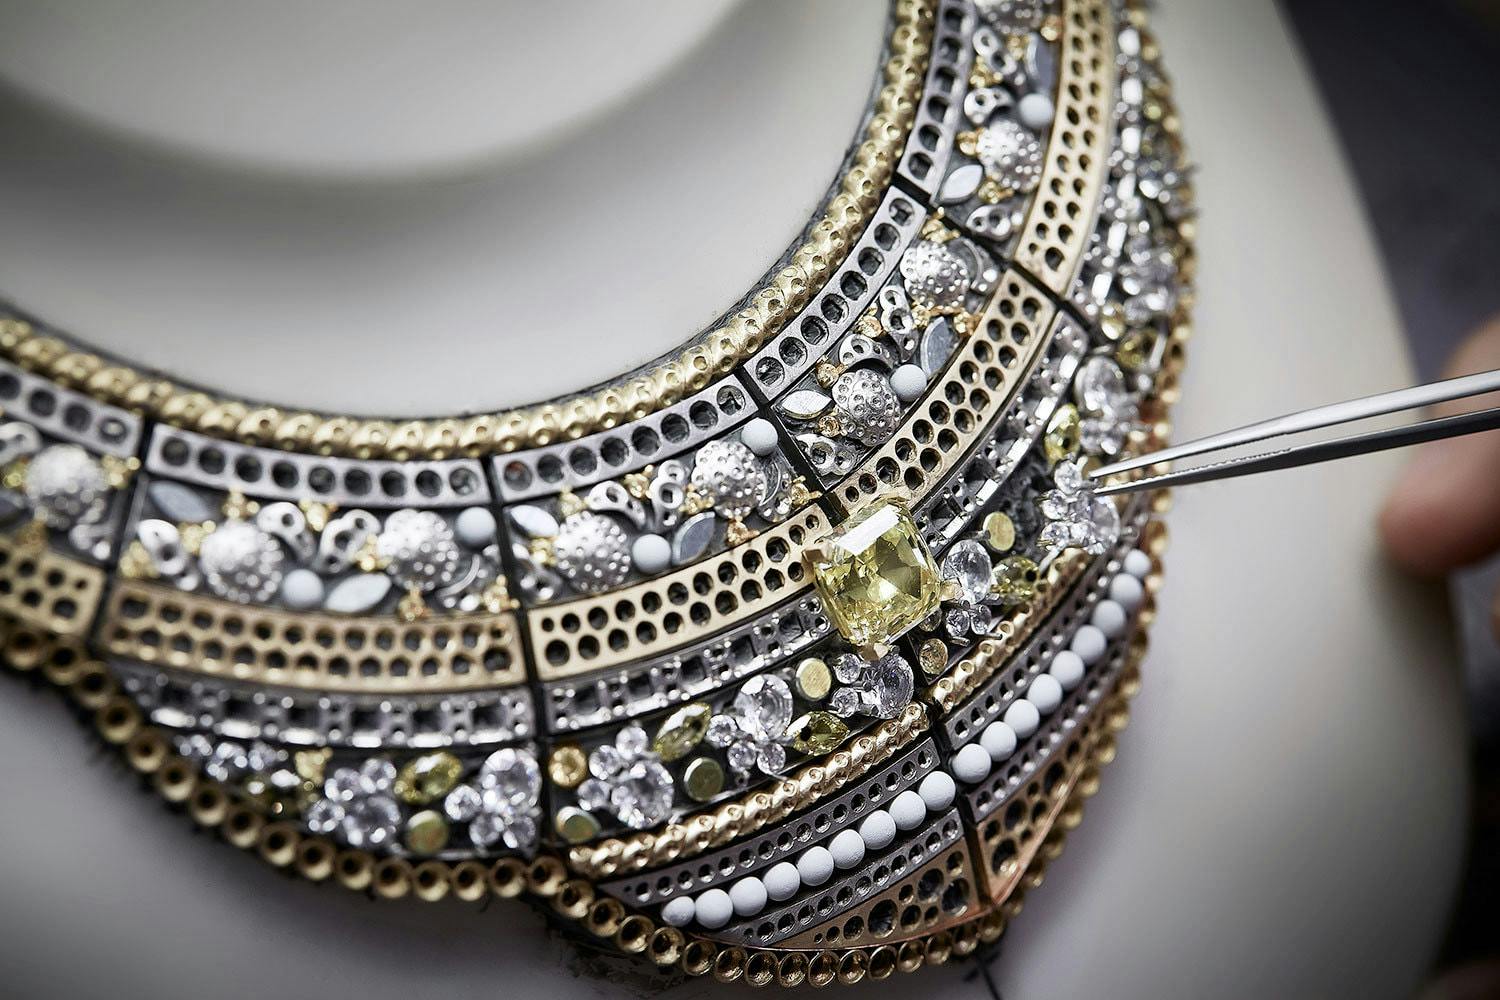 What is your favourite jewelry brand? - Quora